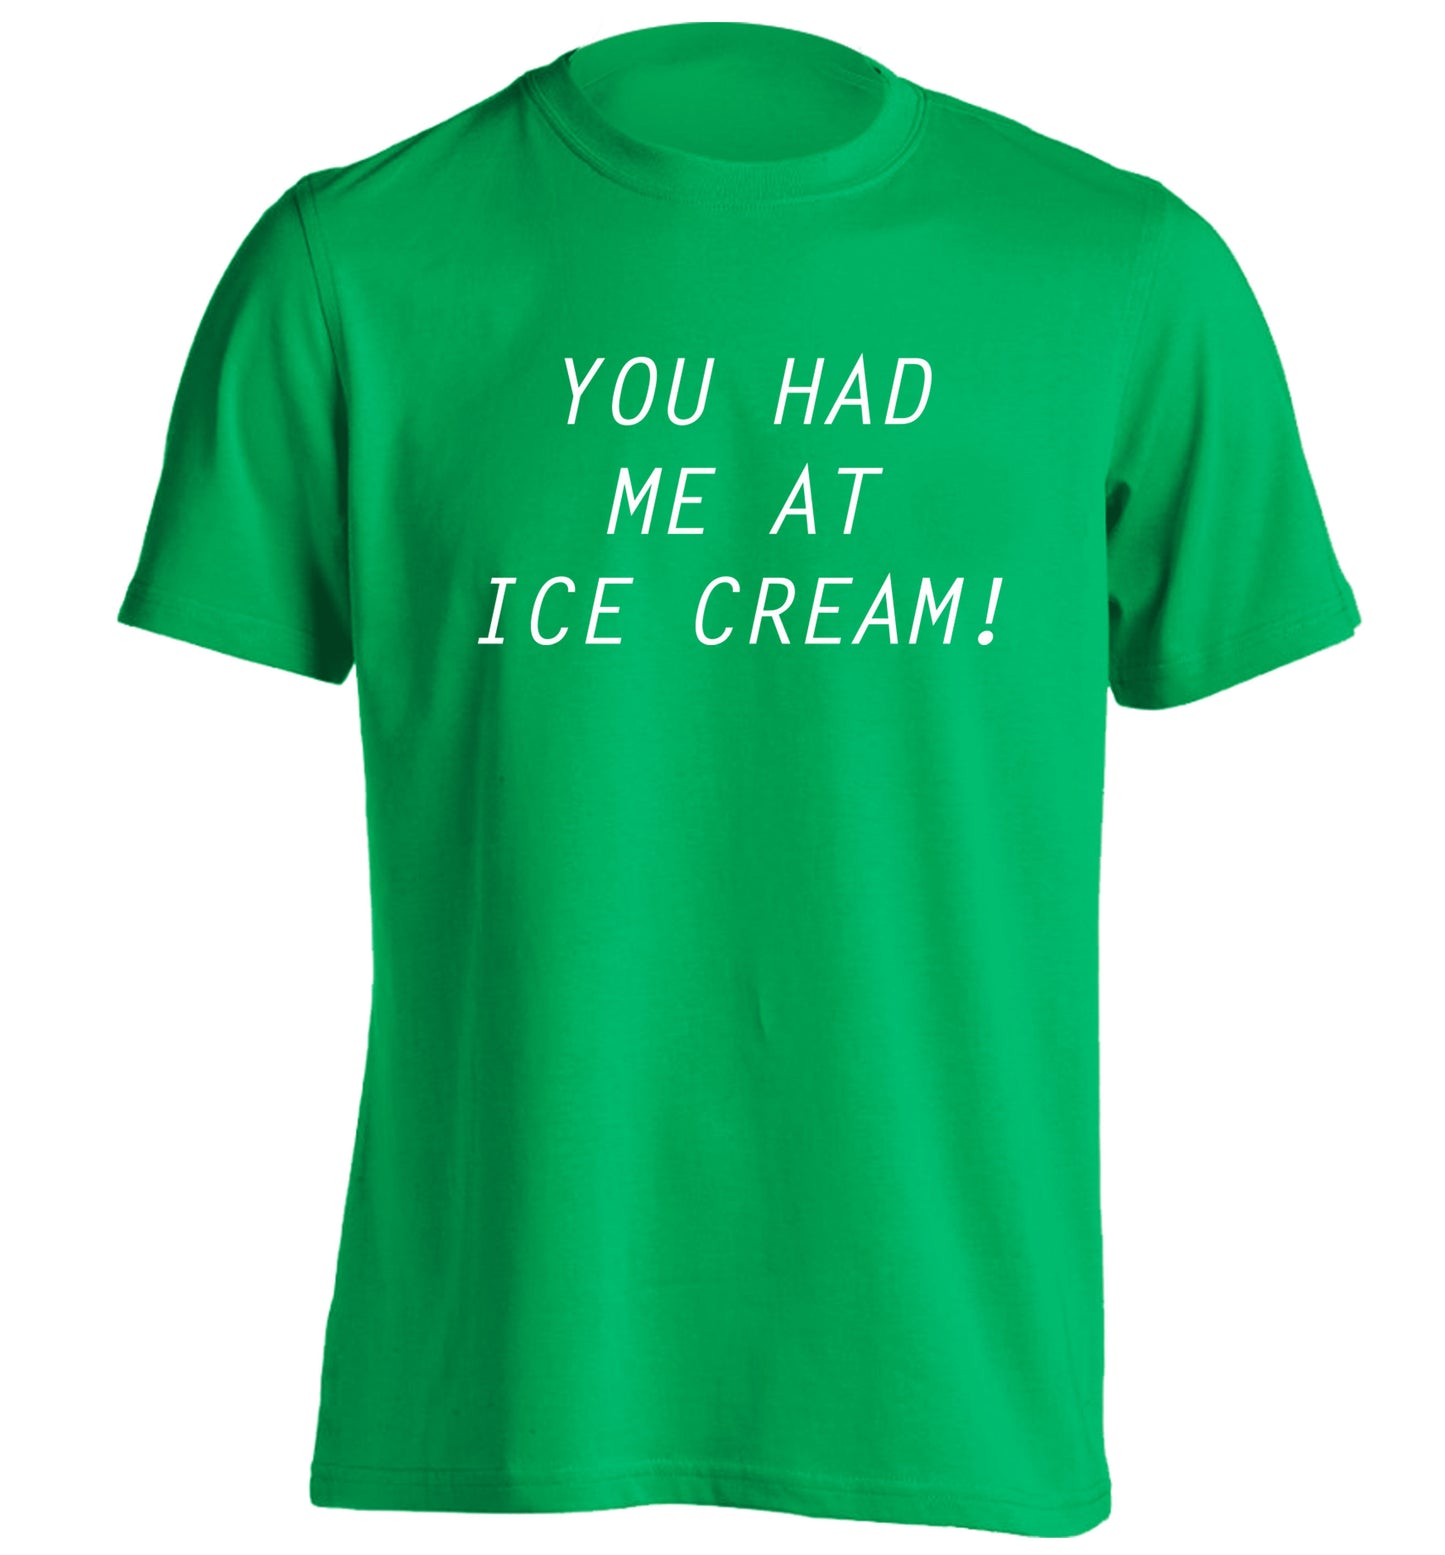 You had me at ice cream adults unisex green Tshirt 2XL